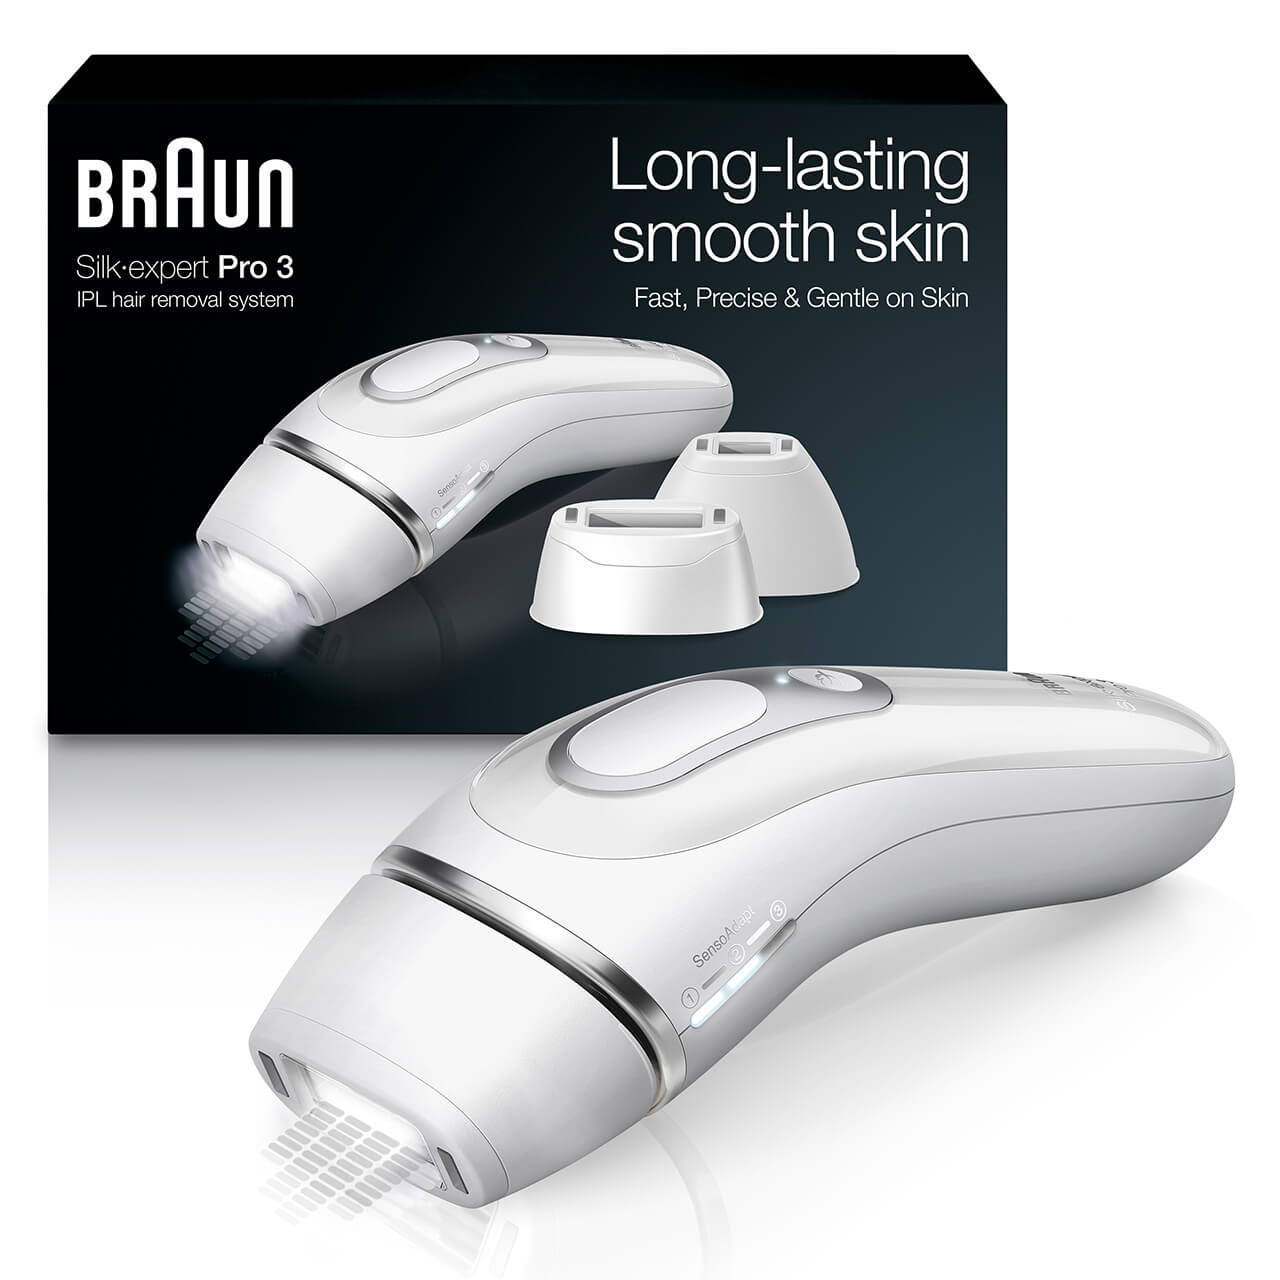 IPL Precision | Braun Wide Cap 5 with Pro Silk-expert and